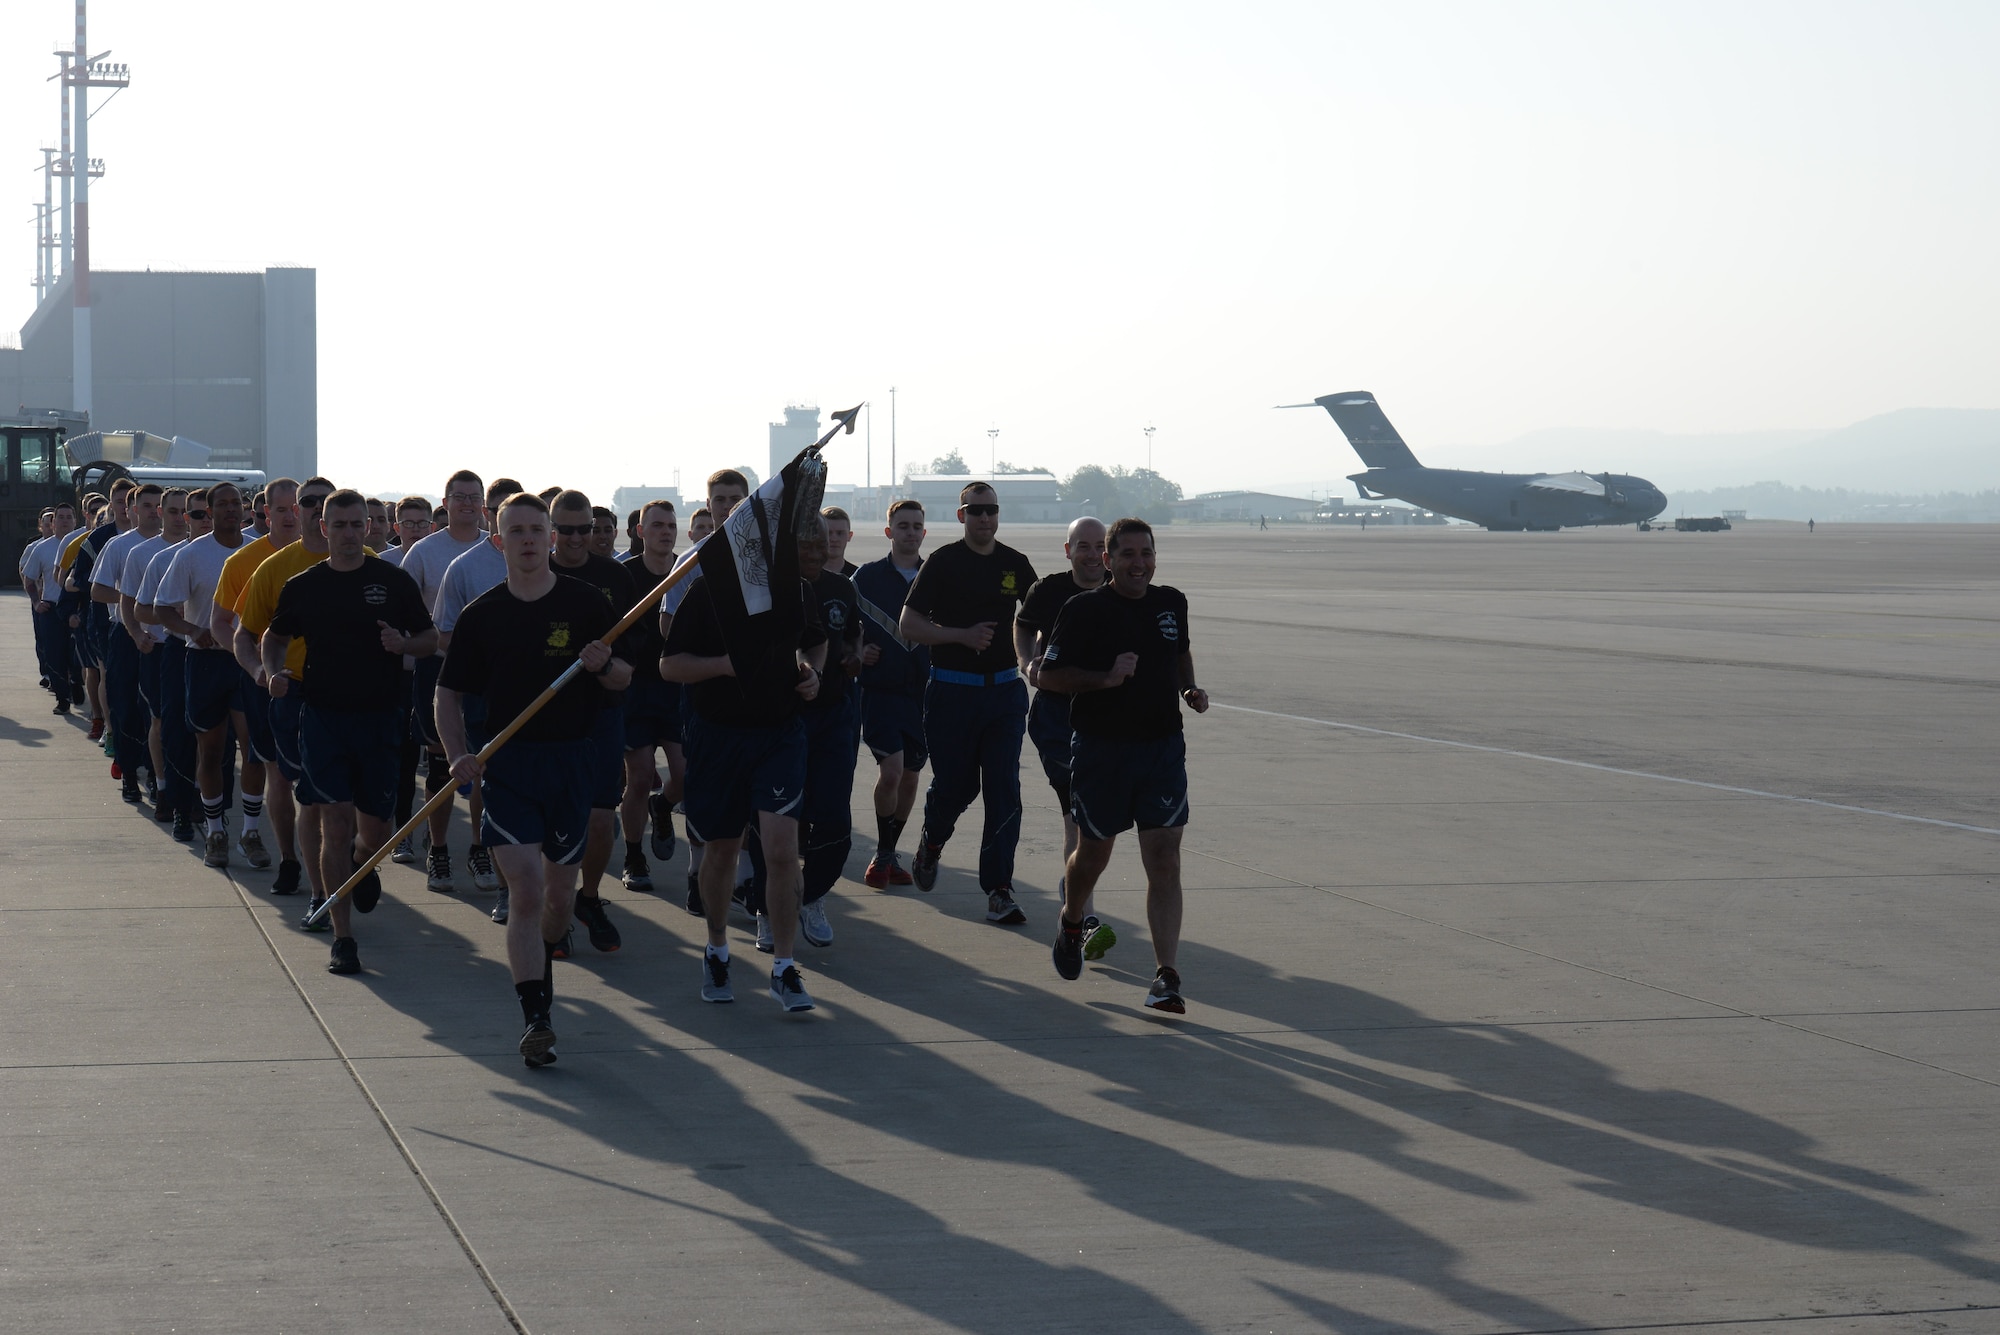 Each year, the third Friday in May is recognized as National Defense Transportation Day. Members of the Air Force air transportation community, commonly referred to as “Port Dawgs,” come together to remember fallen Port Dawgs and the contributions they have given to the Air Force.